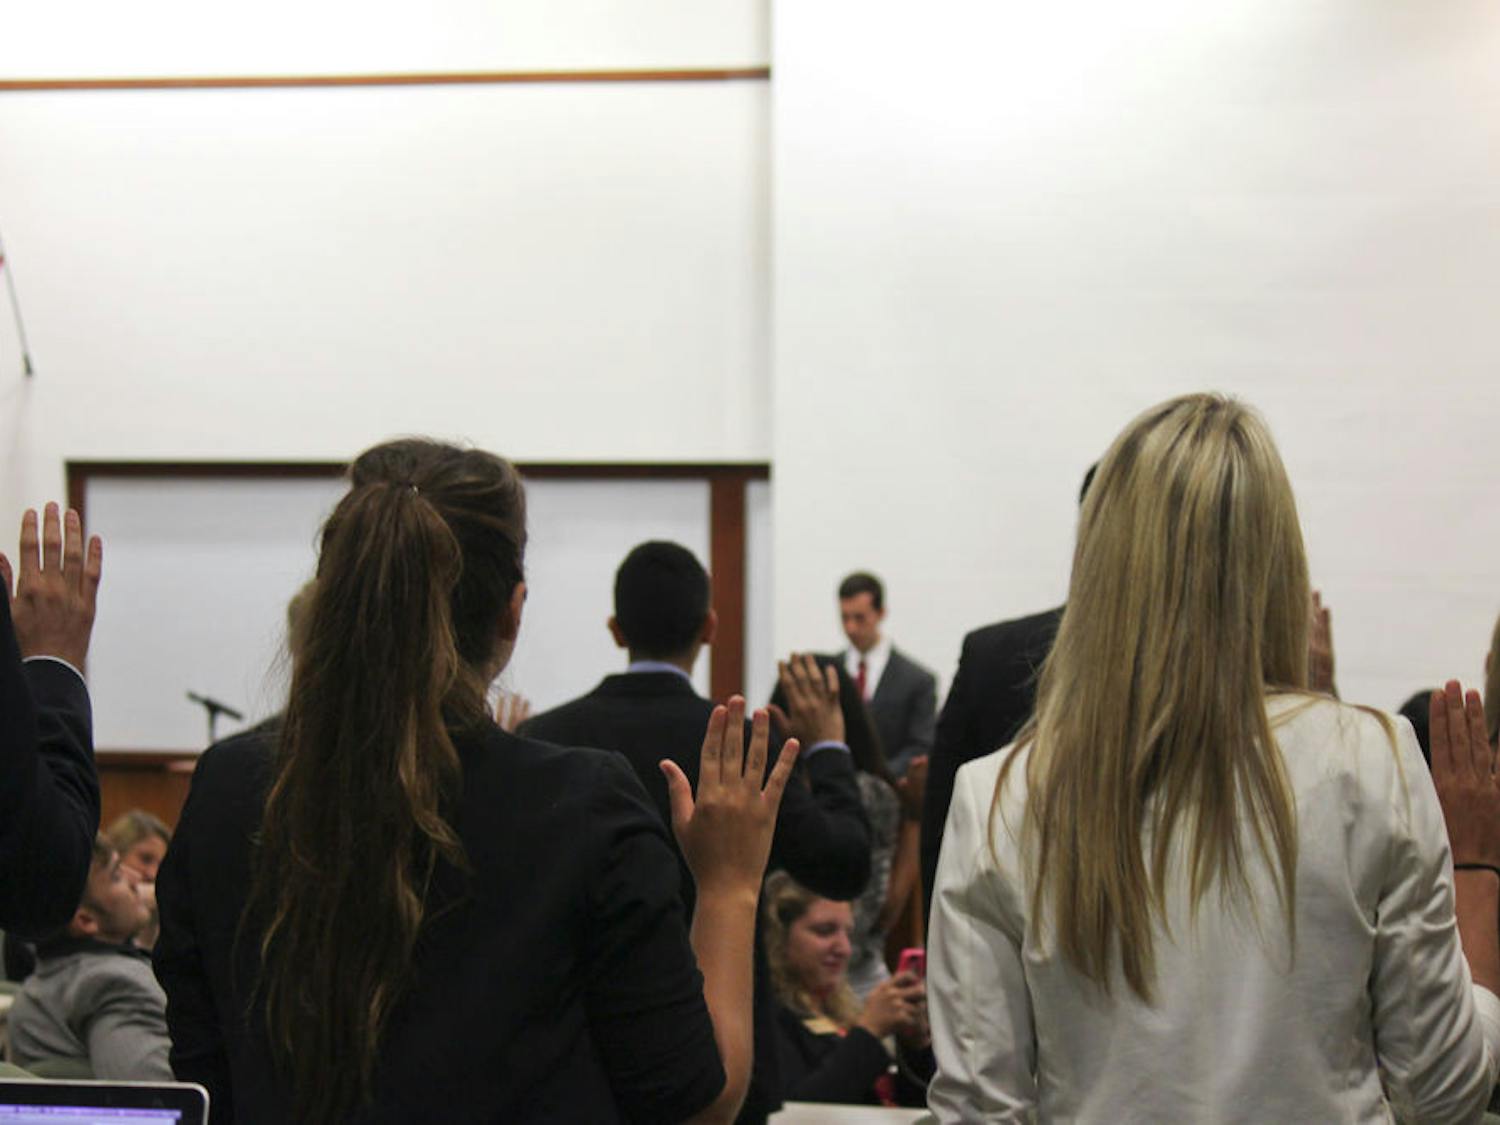 Members of the new 2014-2015 UF Student Senate are sworn in at Tuesday’s meeting.